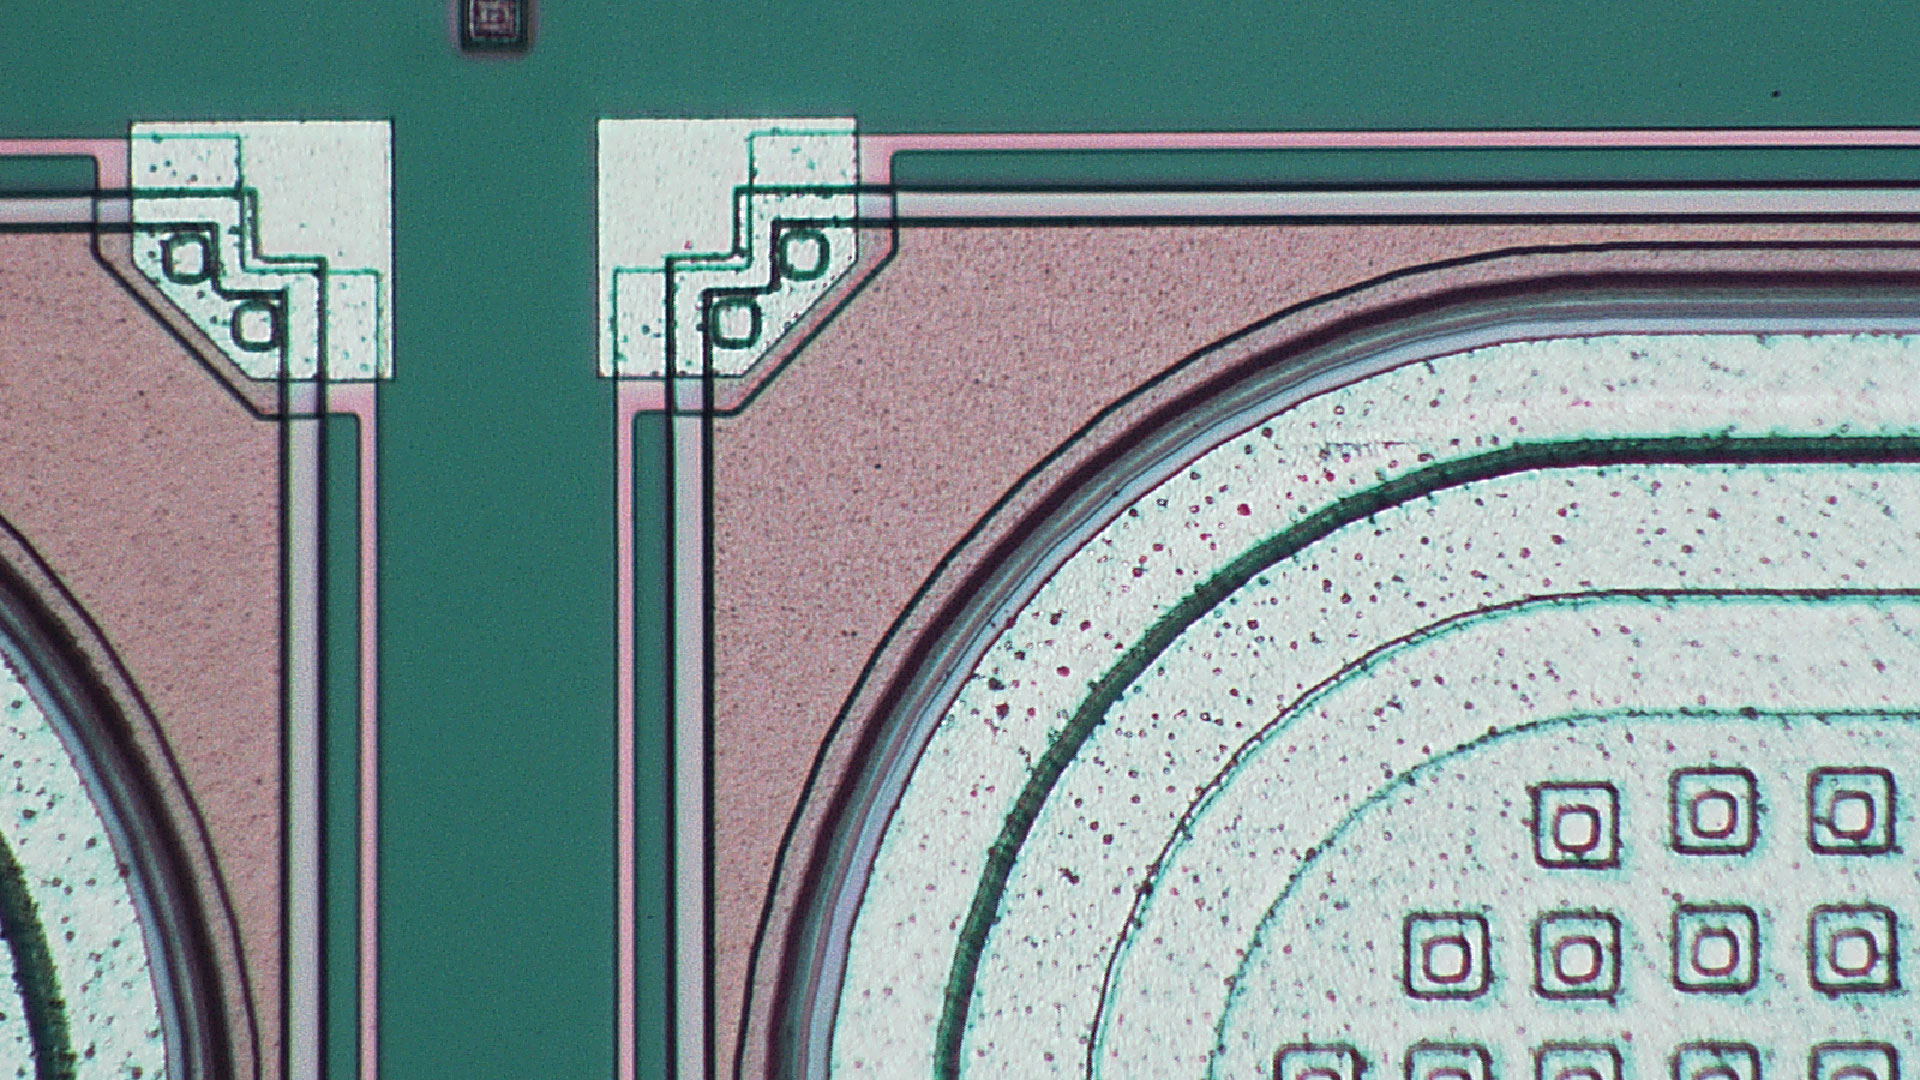 To better see fine details and defects, a semiconductor material can be inspected using a microscope with various types of lighting. This image was taken with coaxial illumination. 